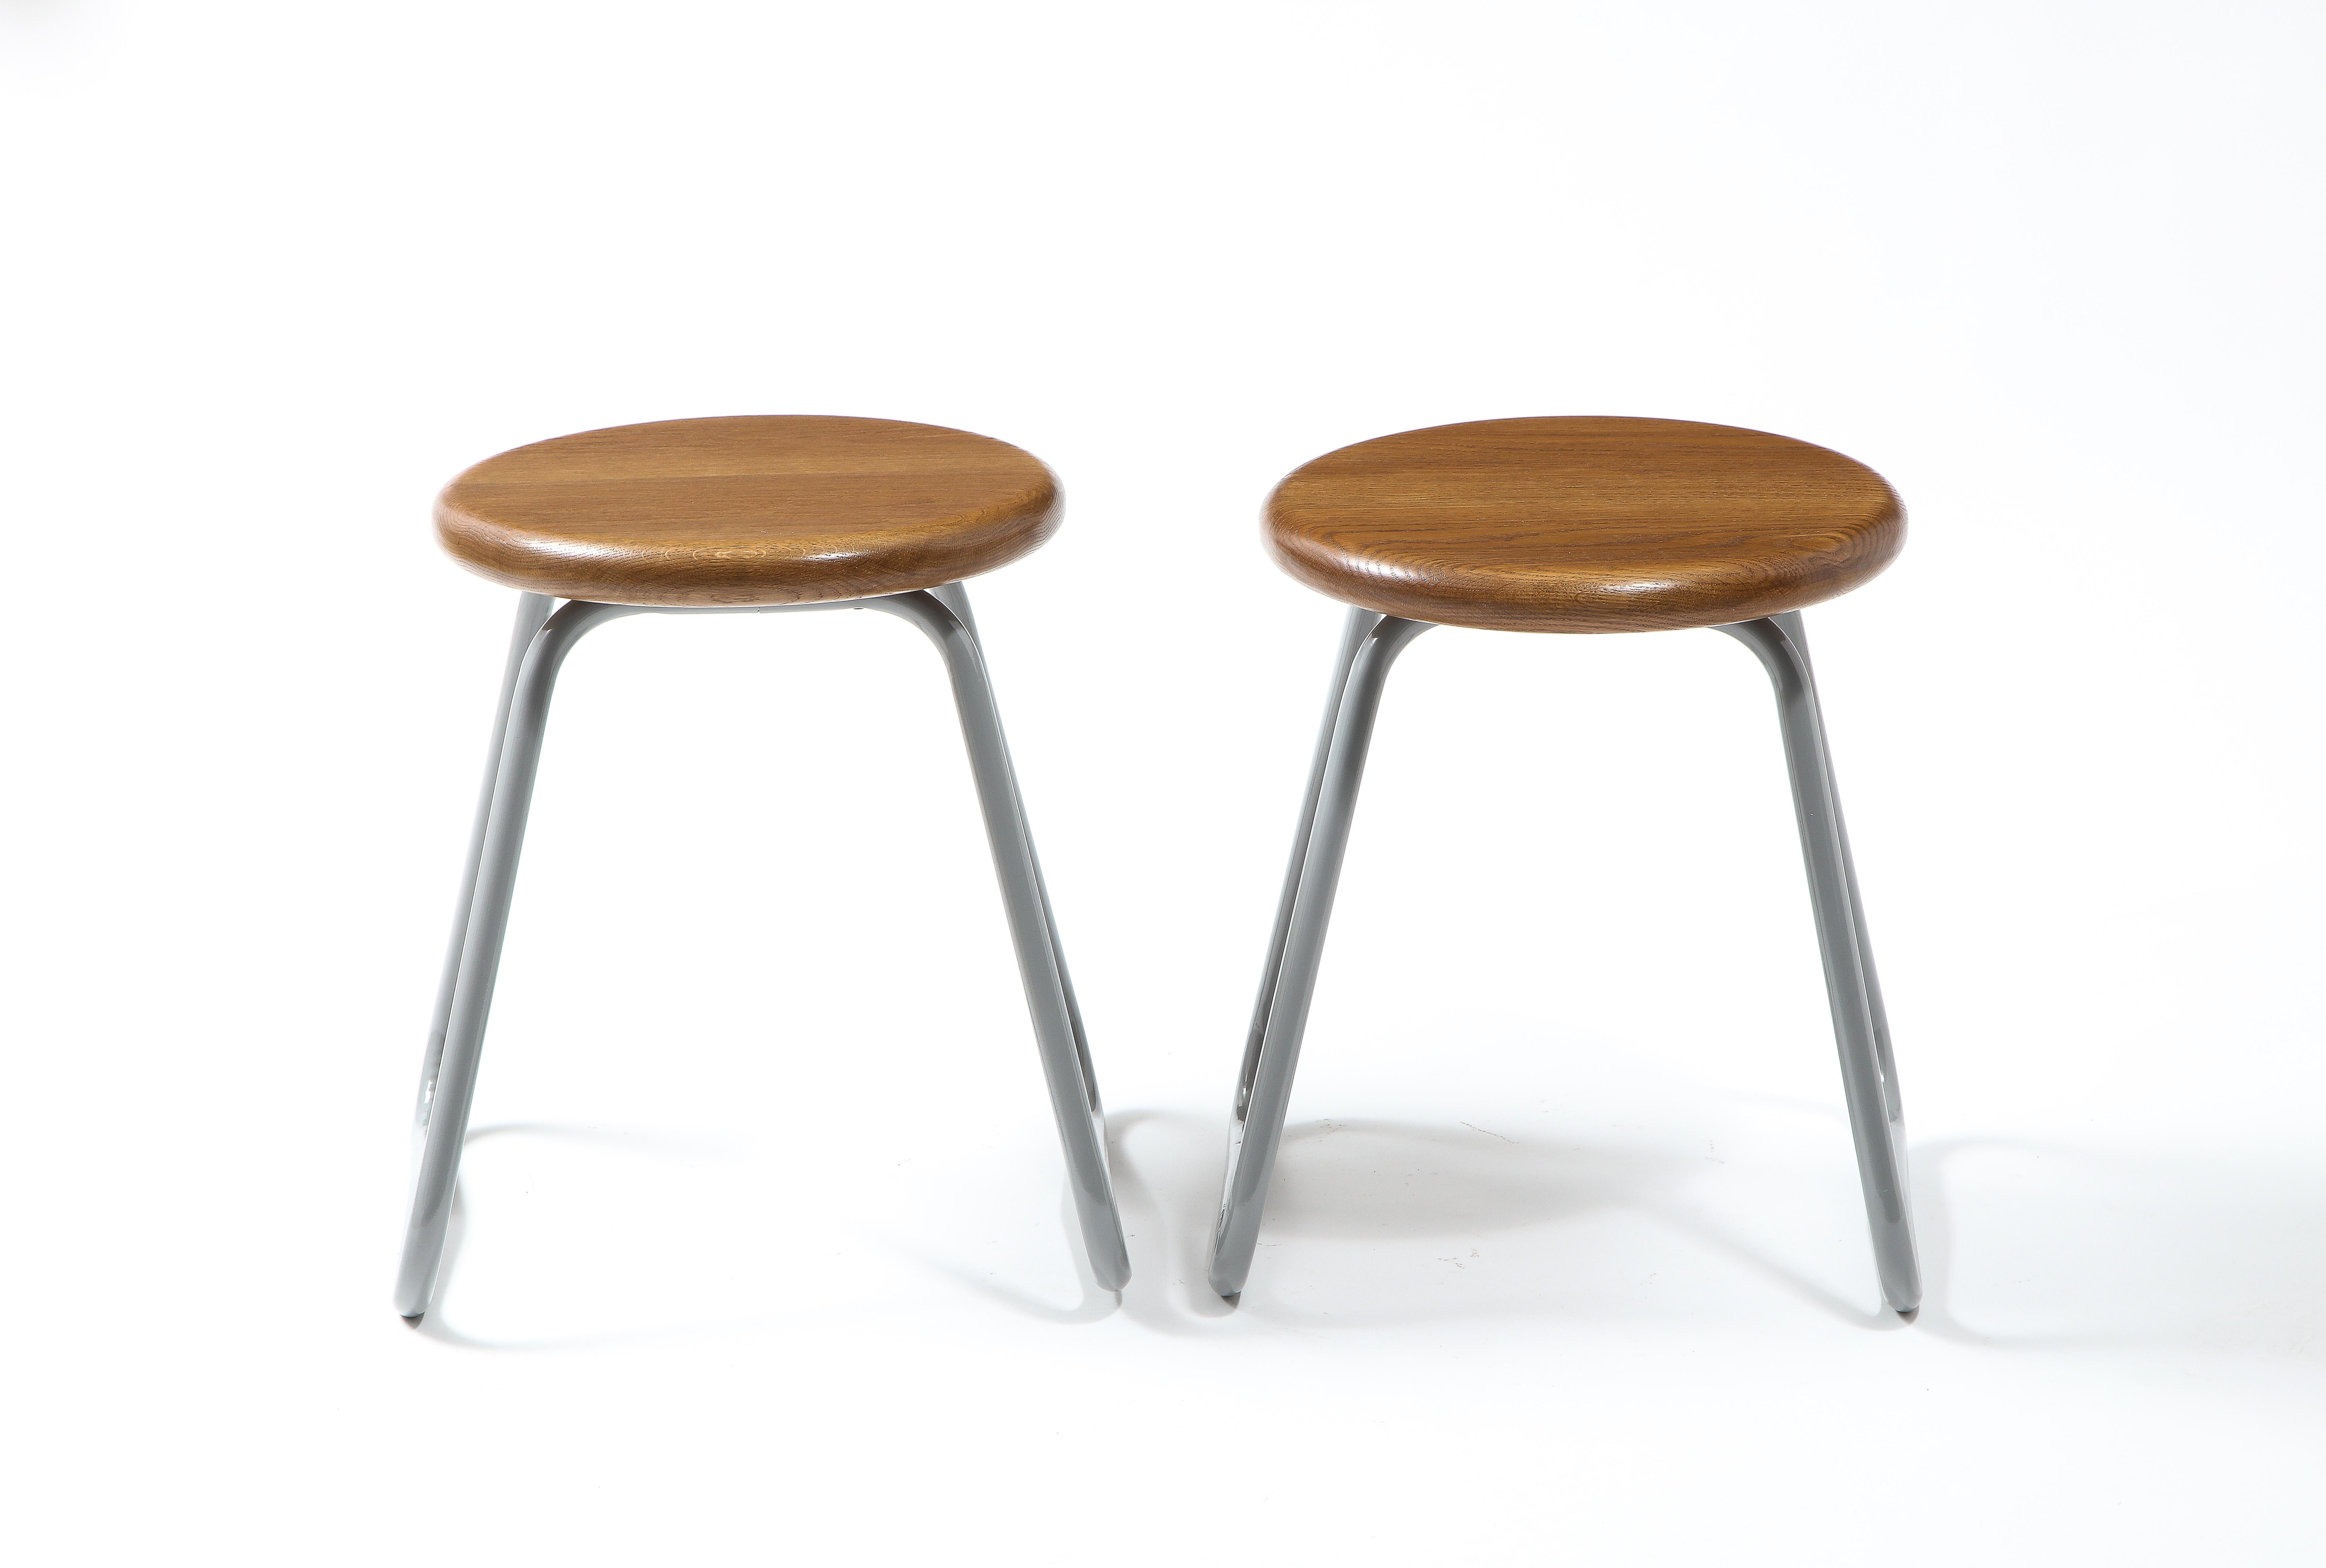 Steel & Oak Stools, France 1960's In Good Condition For Sale In New York, NY